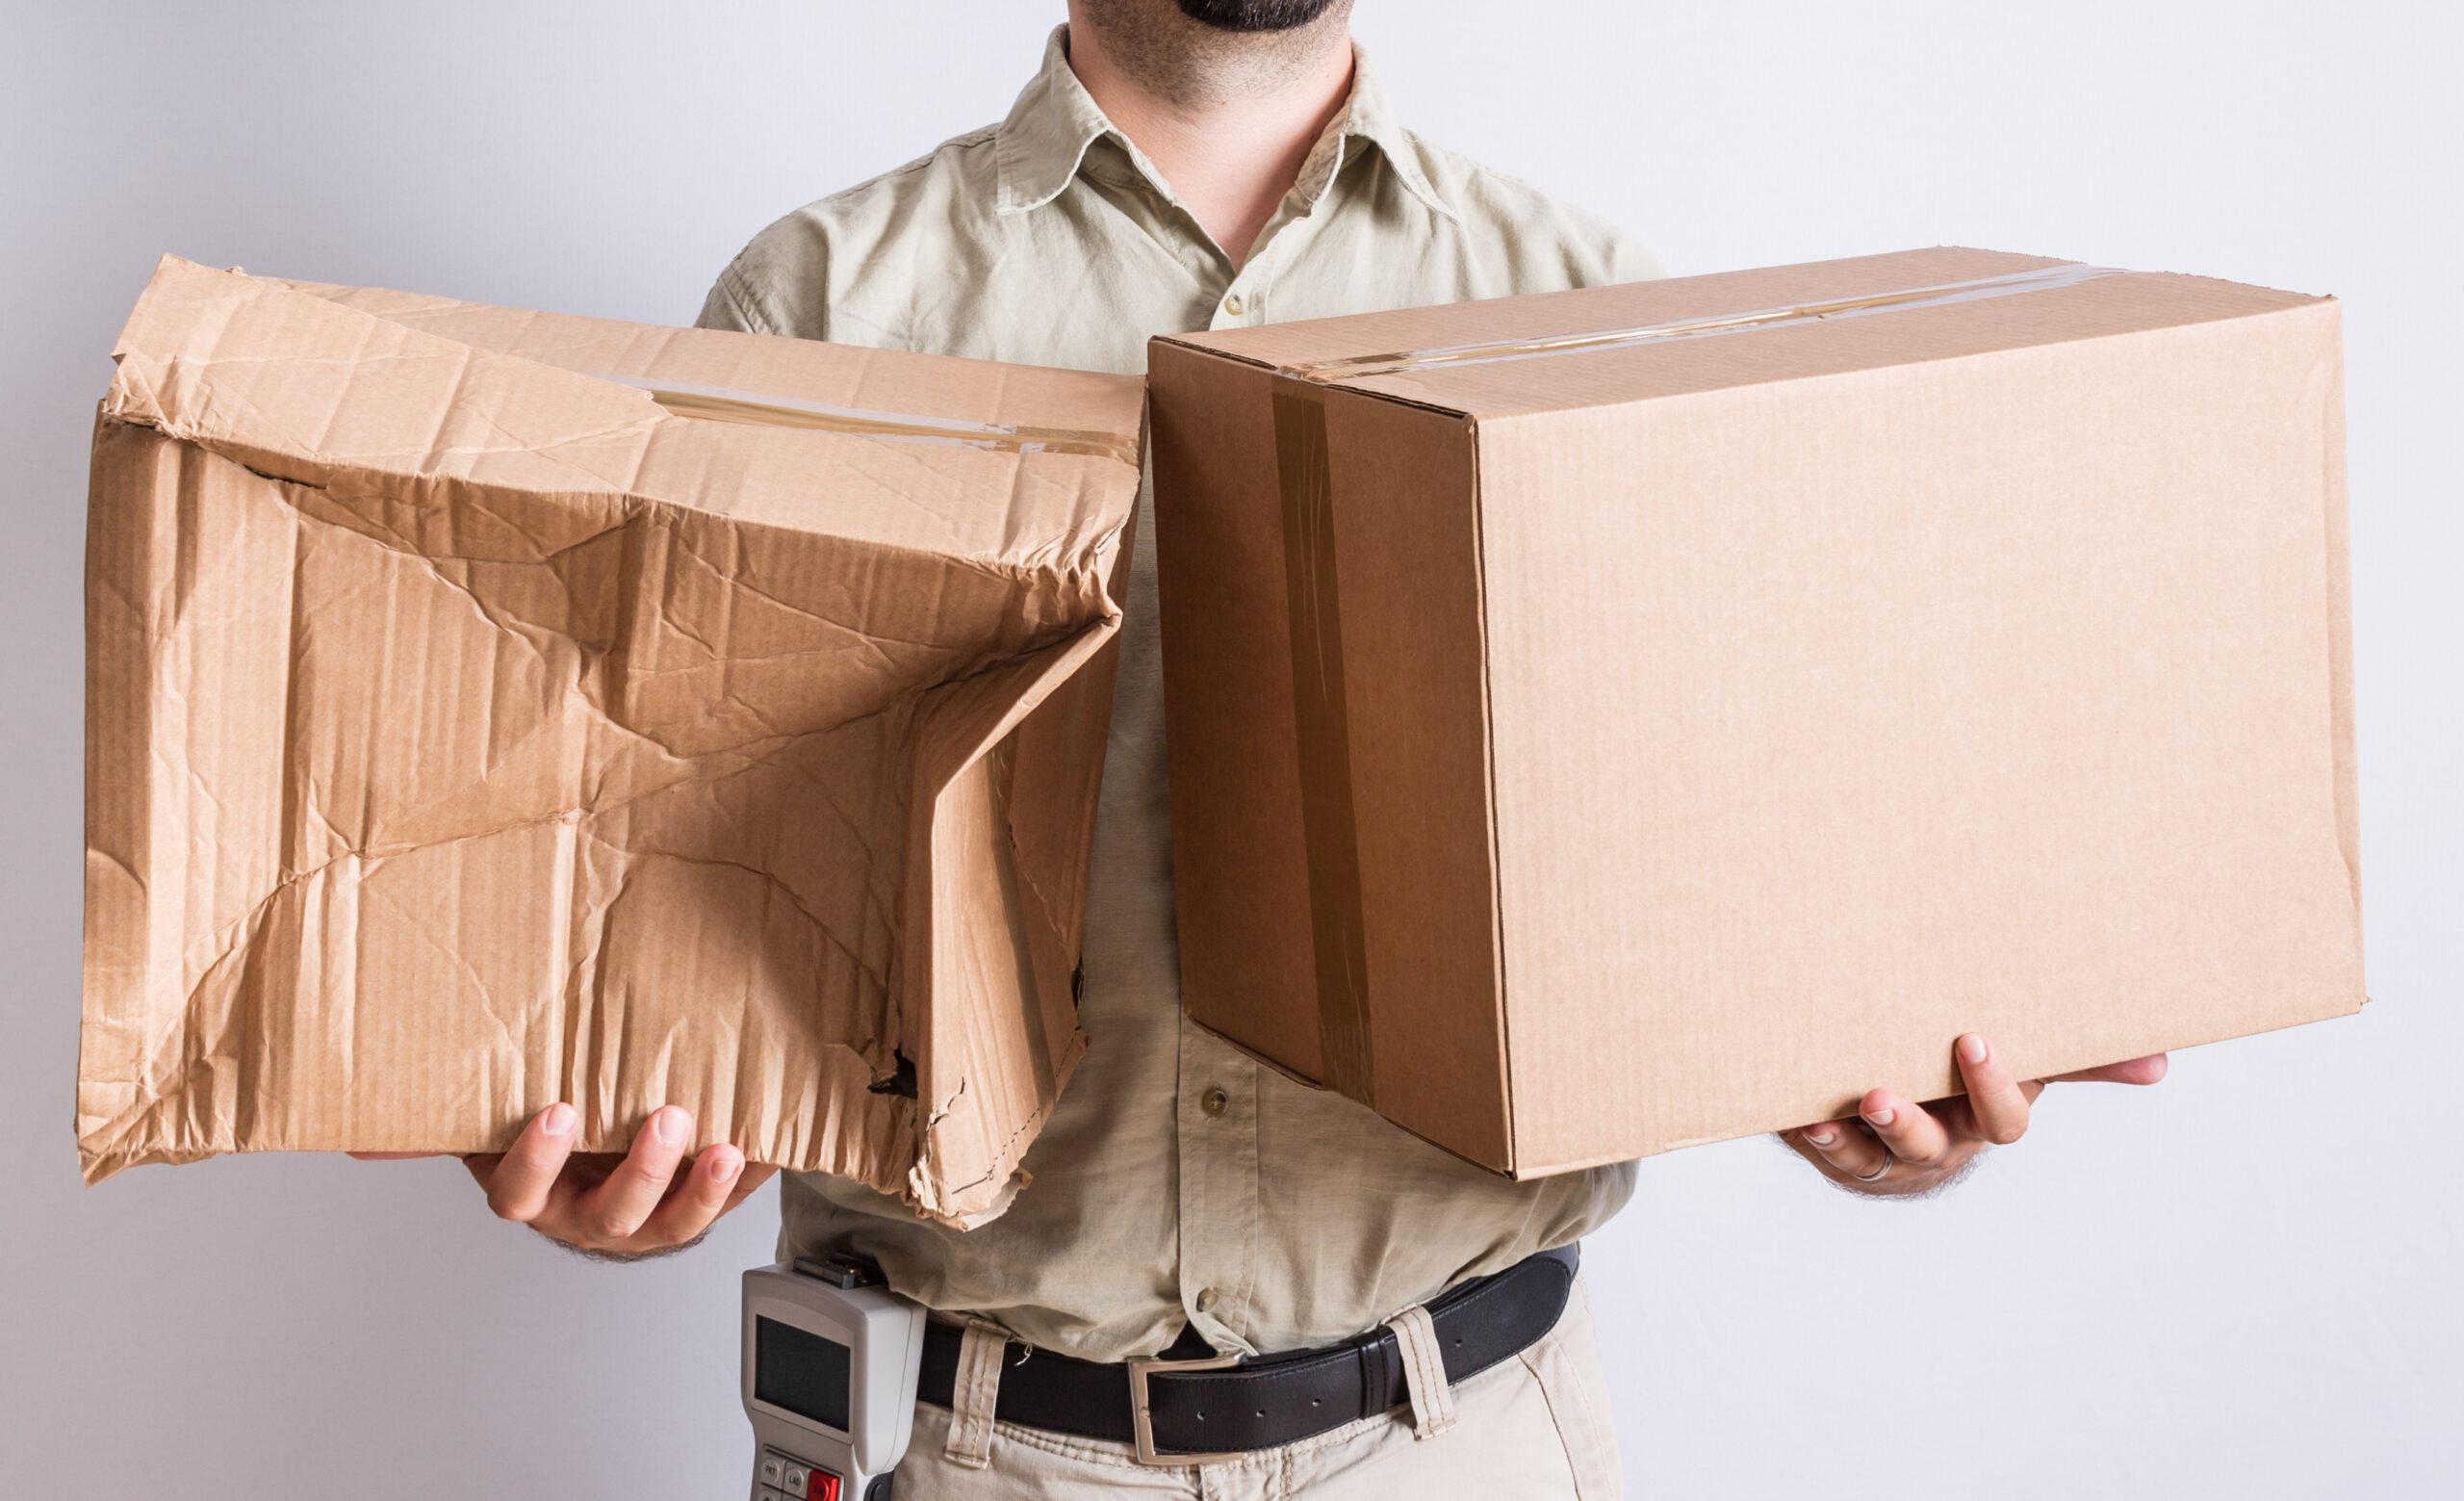 Delivery person holding Damaged Packaging and plain brown box; Damaged packages; shipping damage